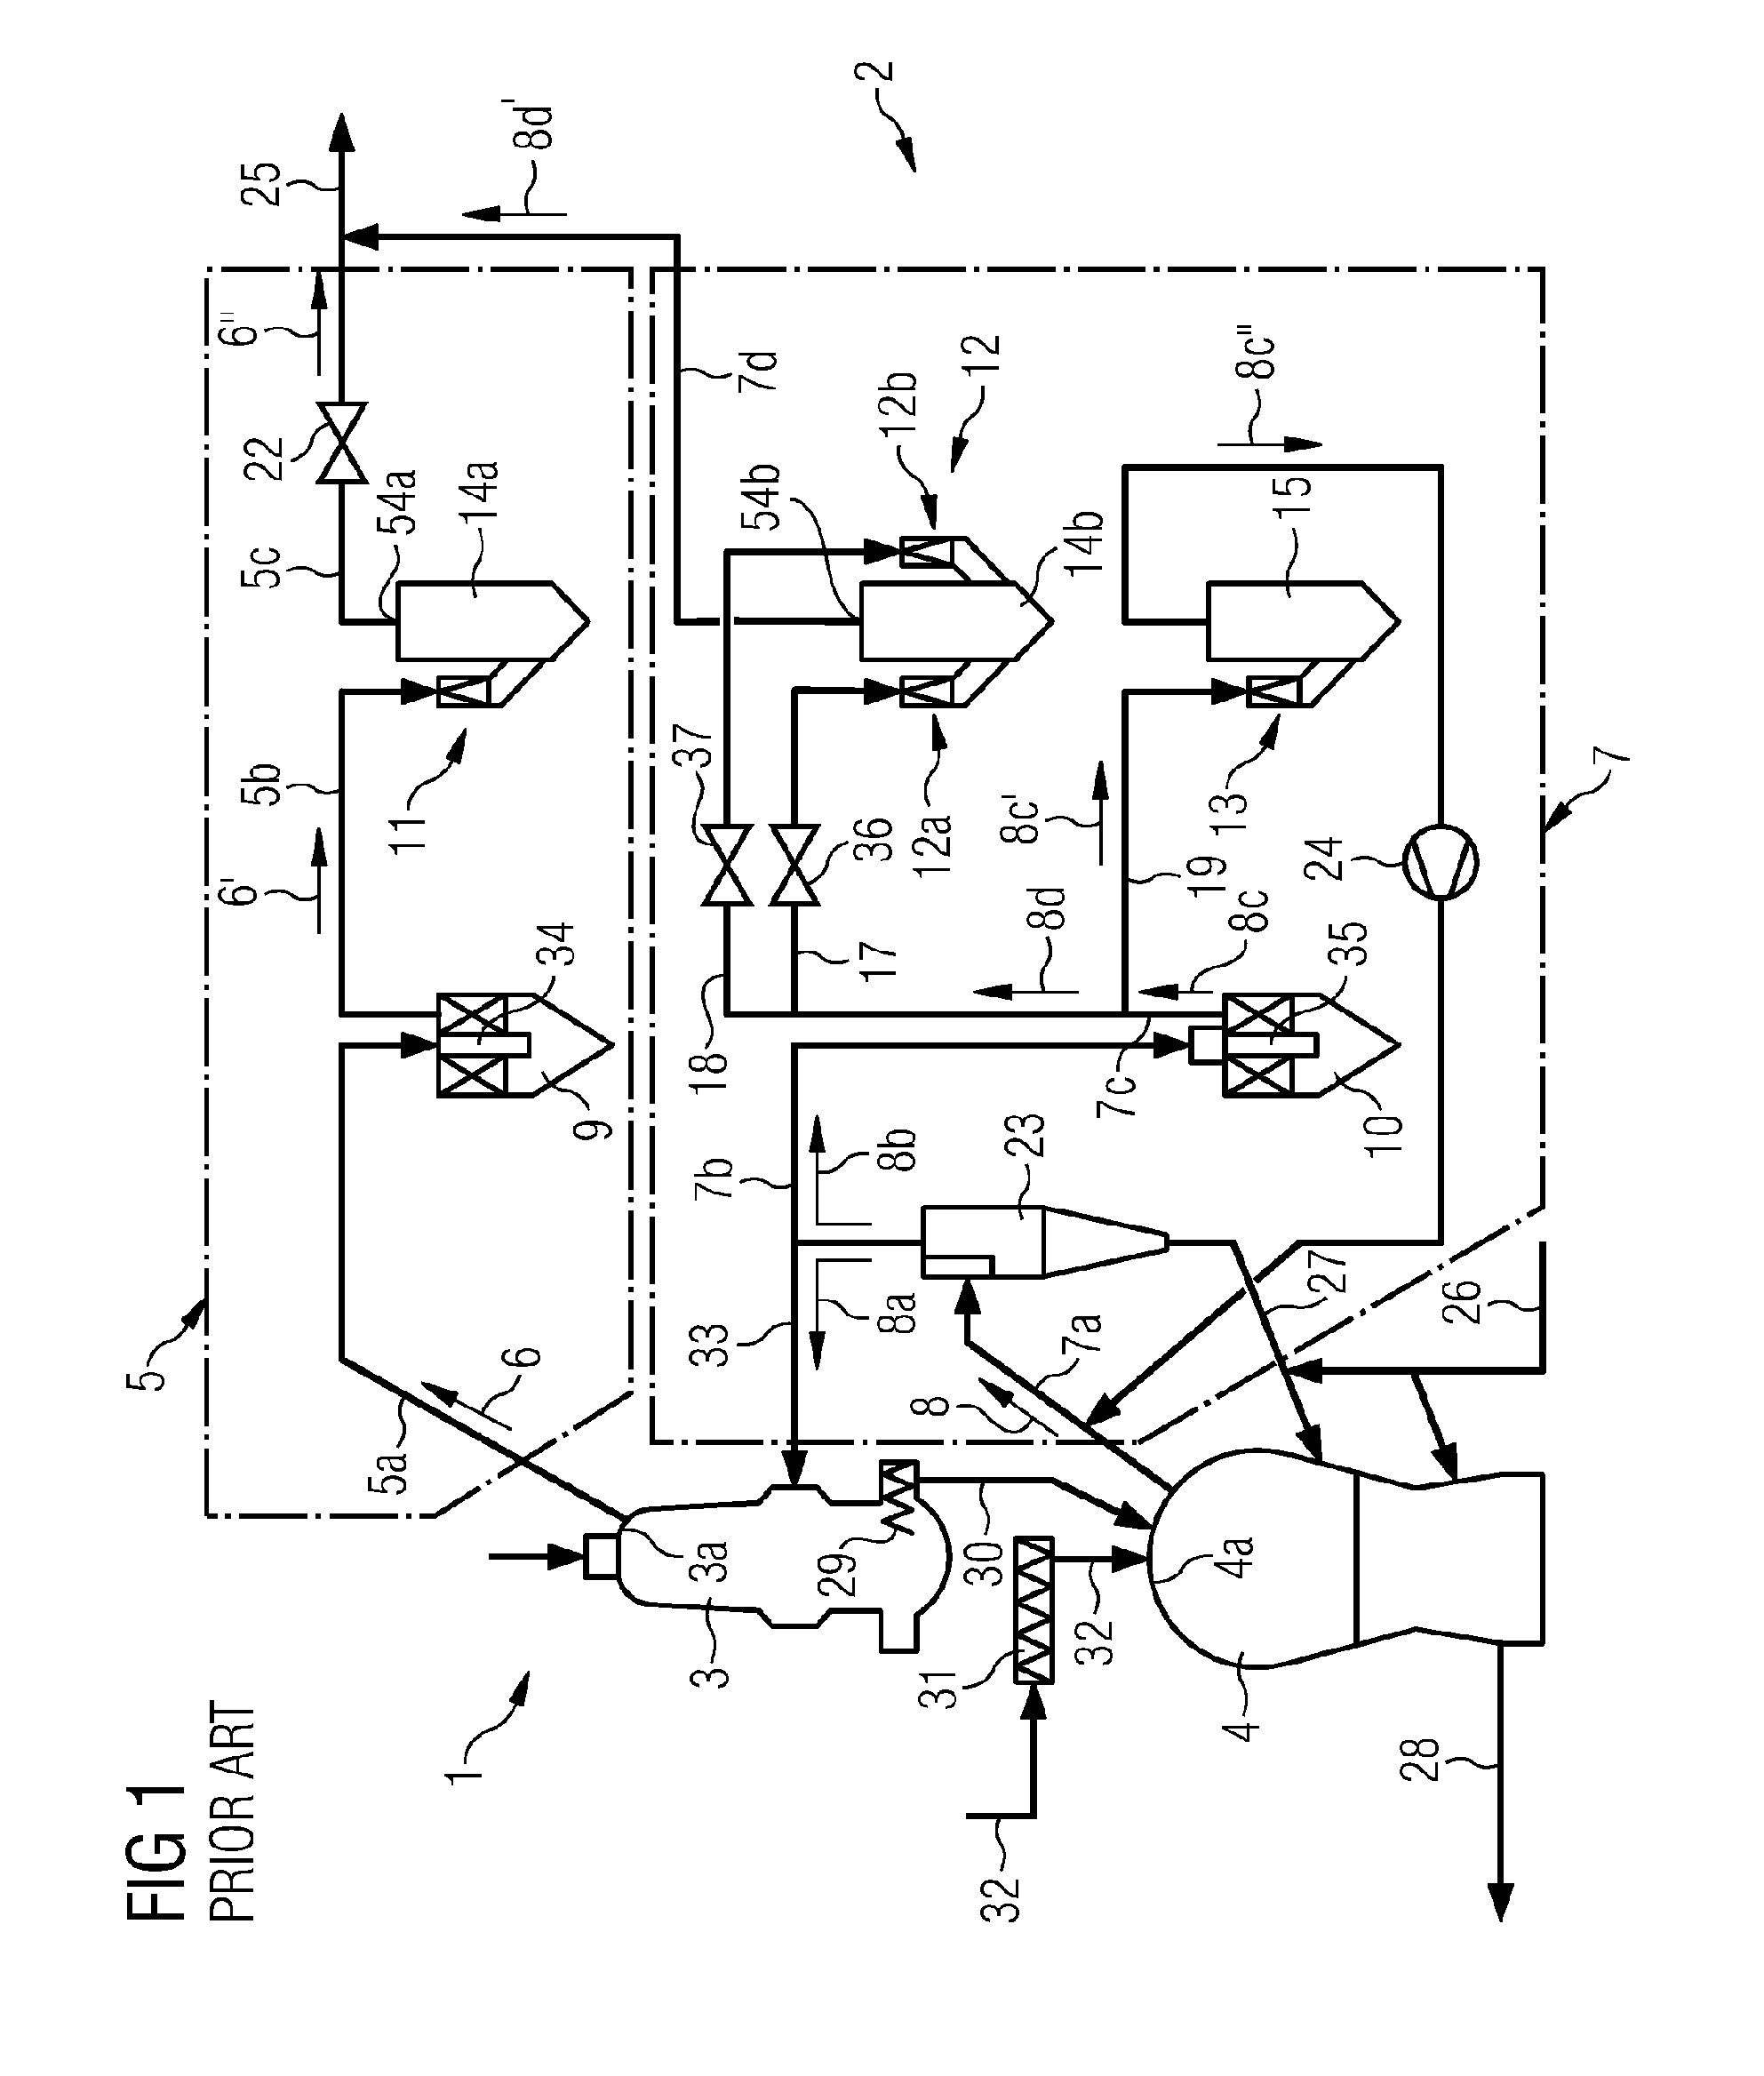 Process gas purification device for a melt reduction system for extracting pig iron